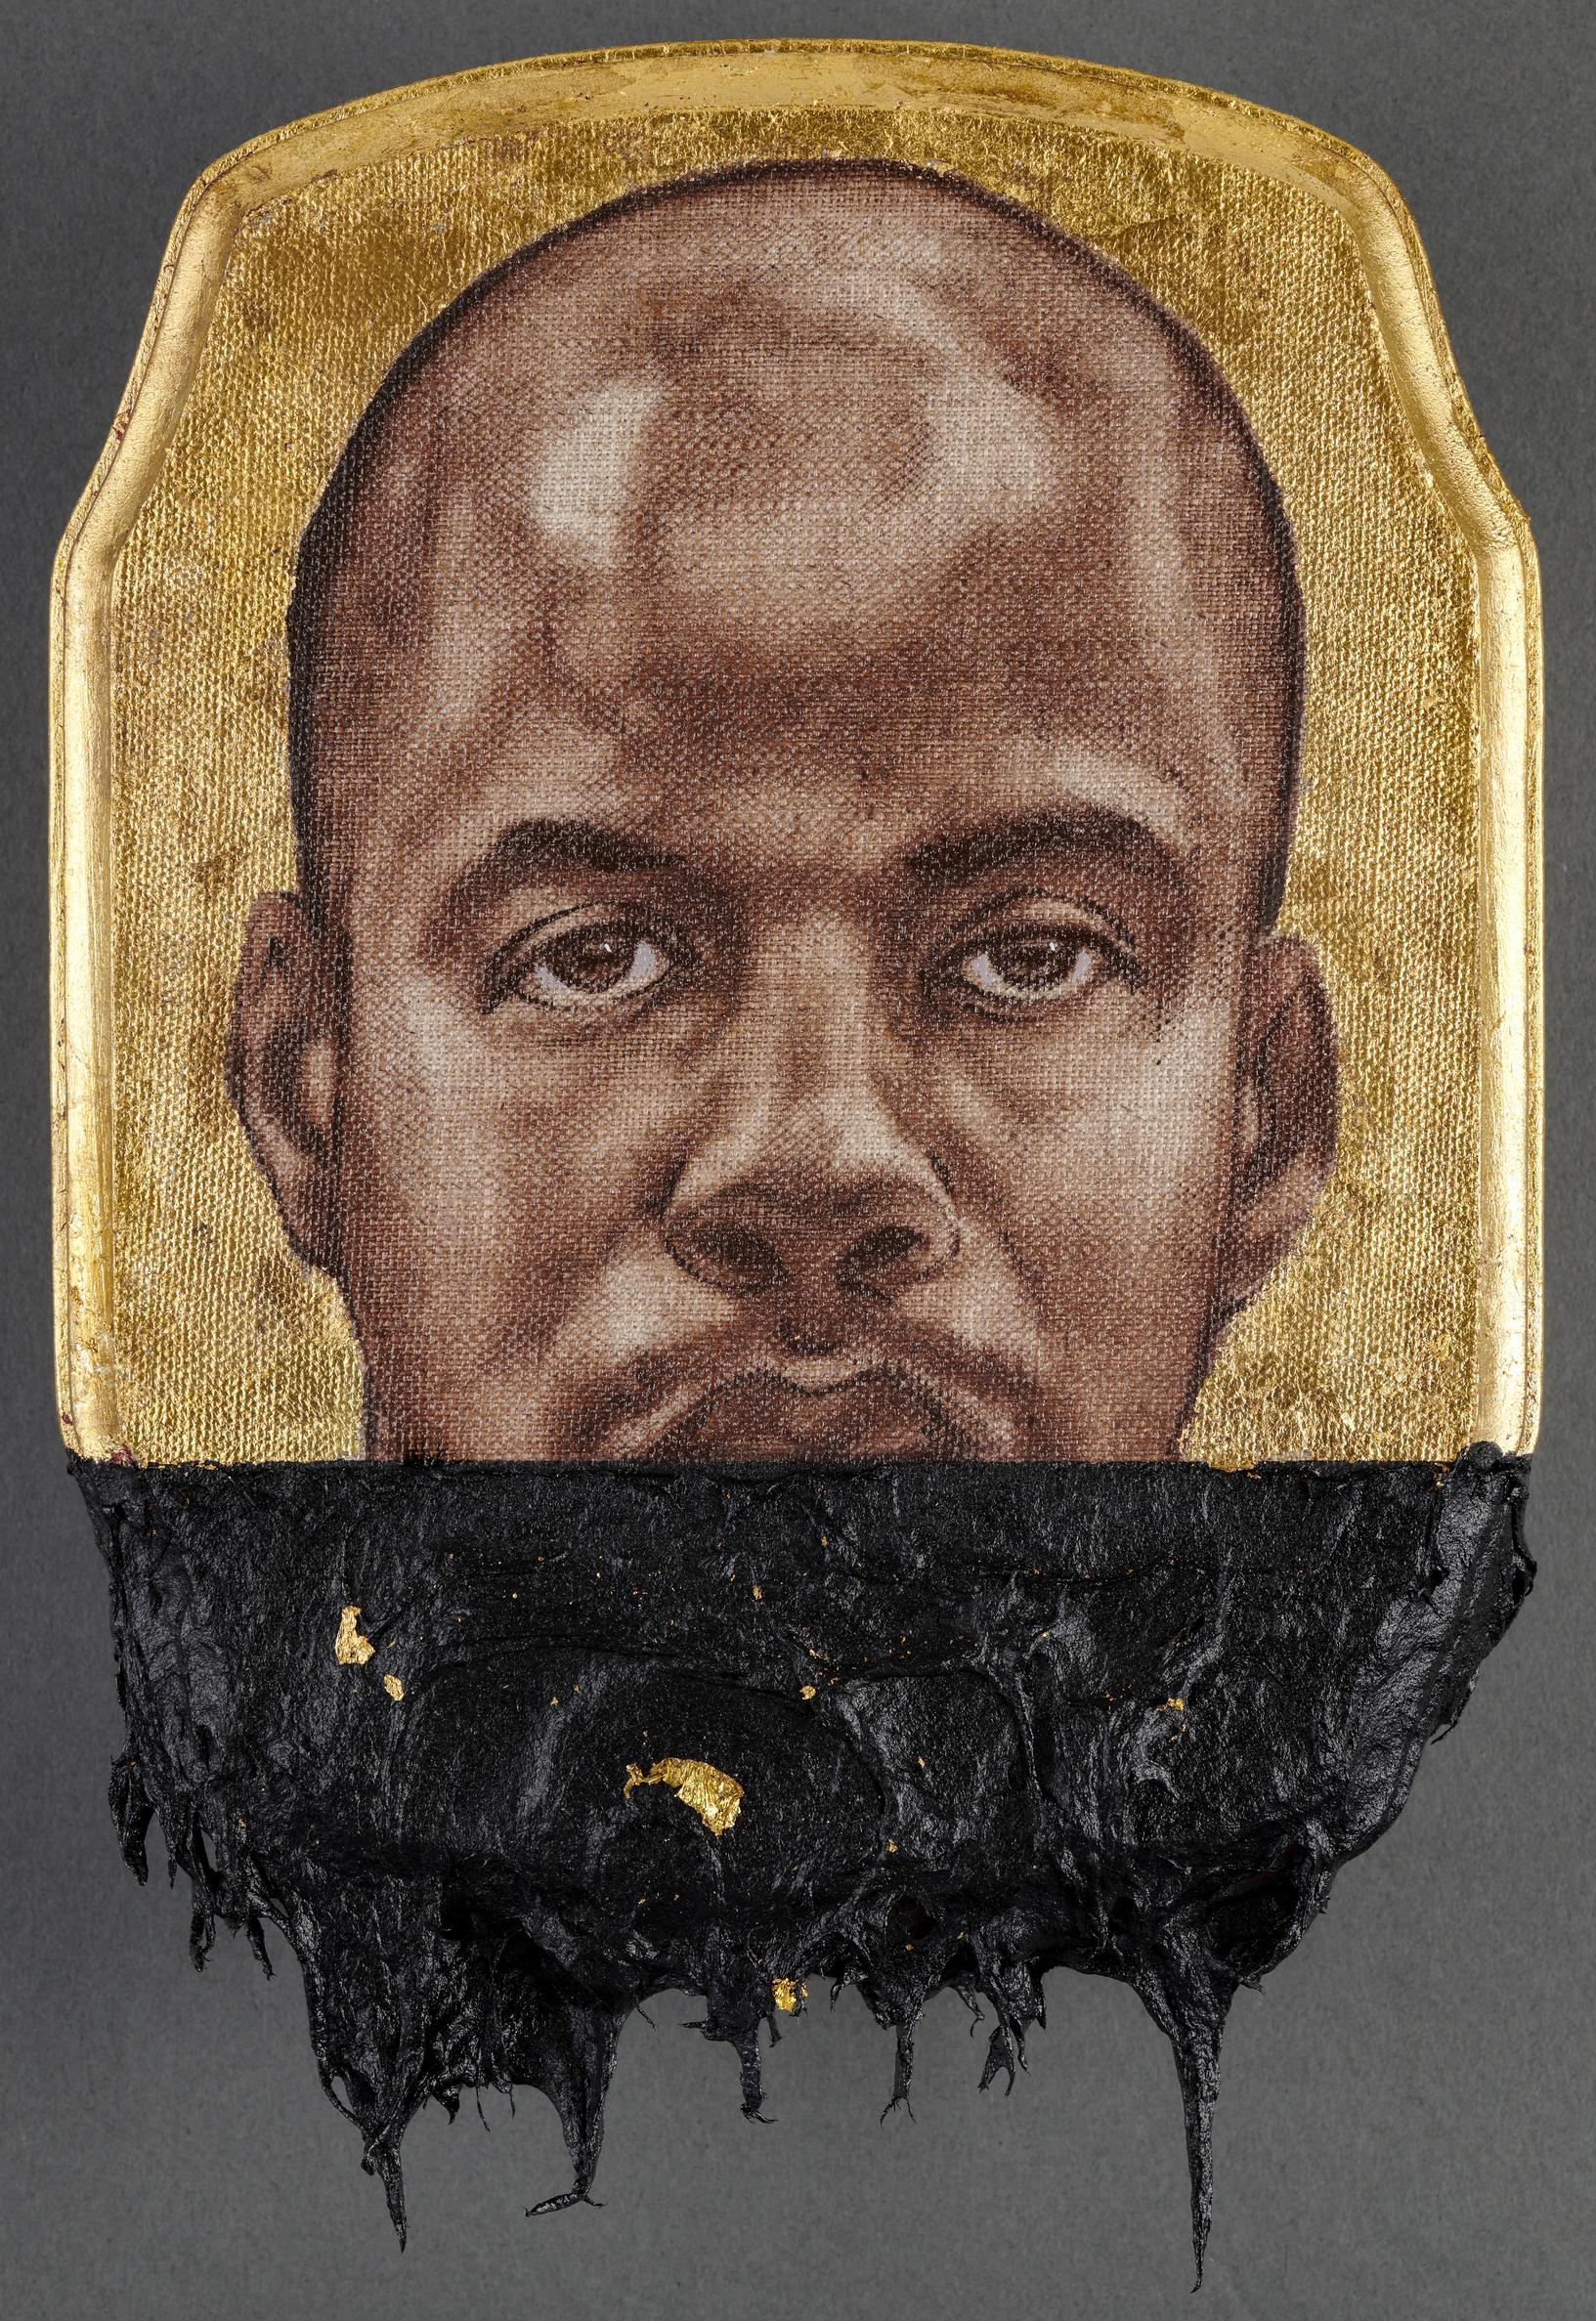 Titus Kaphar, Jerome XXII, 2014. Oil, tar, and gold leaf on panel. 25.4 x 17.8 x 2.5 cm (10 x 7 x 1 in.). Collection of Lonti Ebers. 